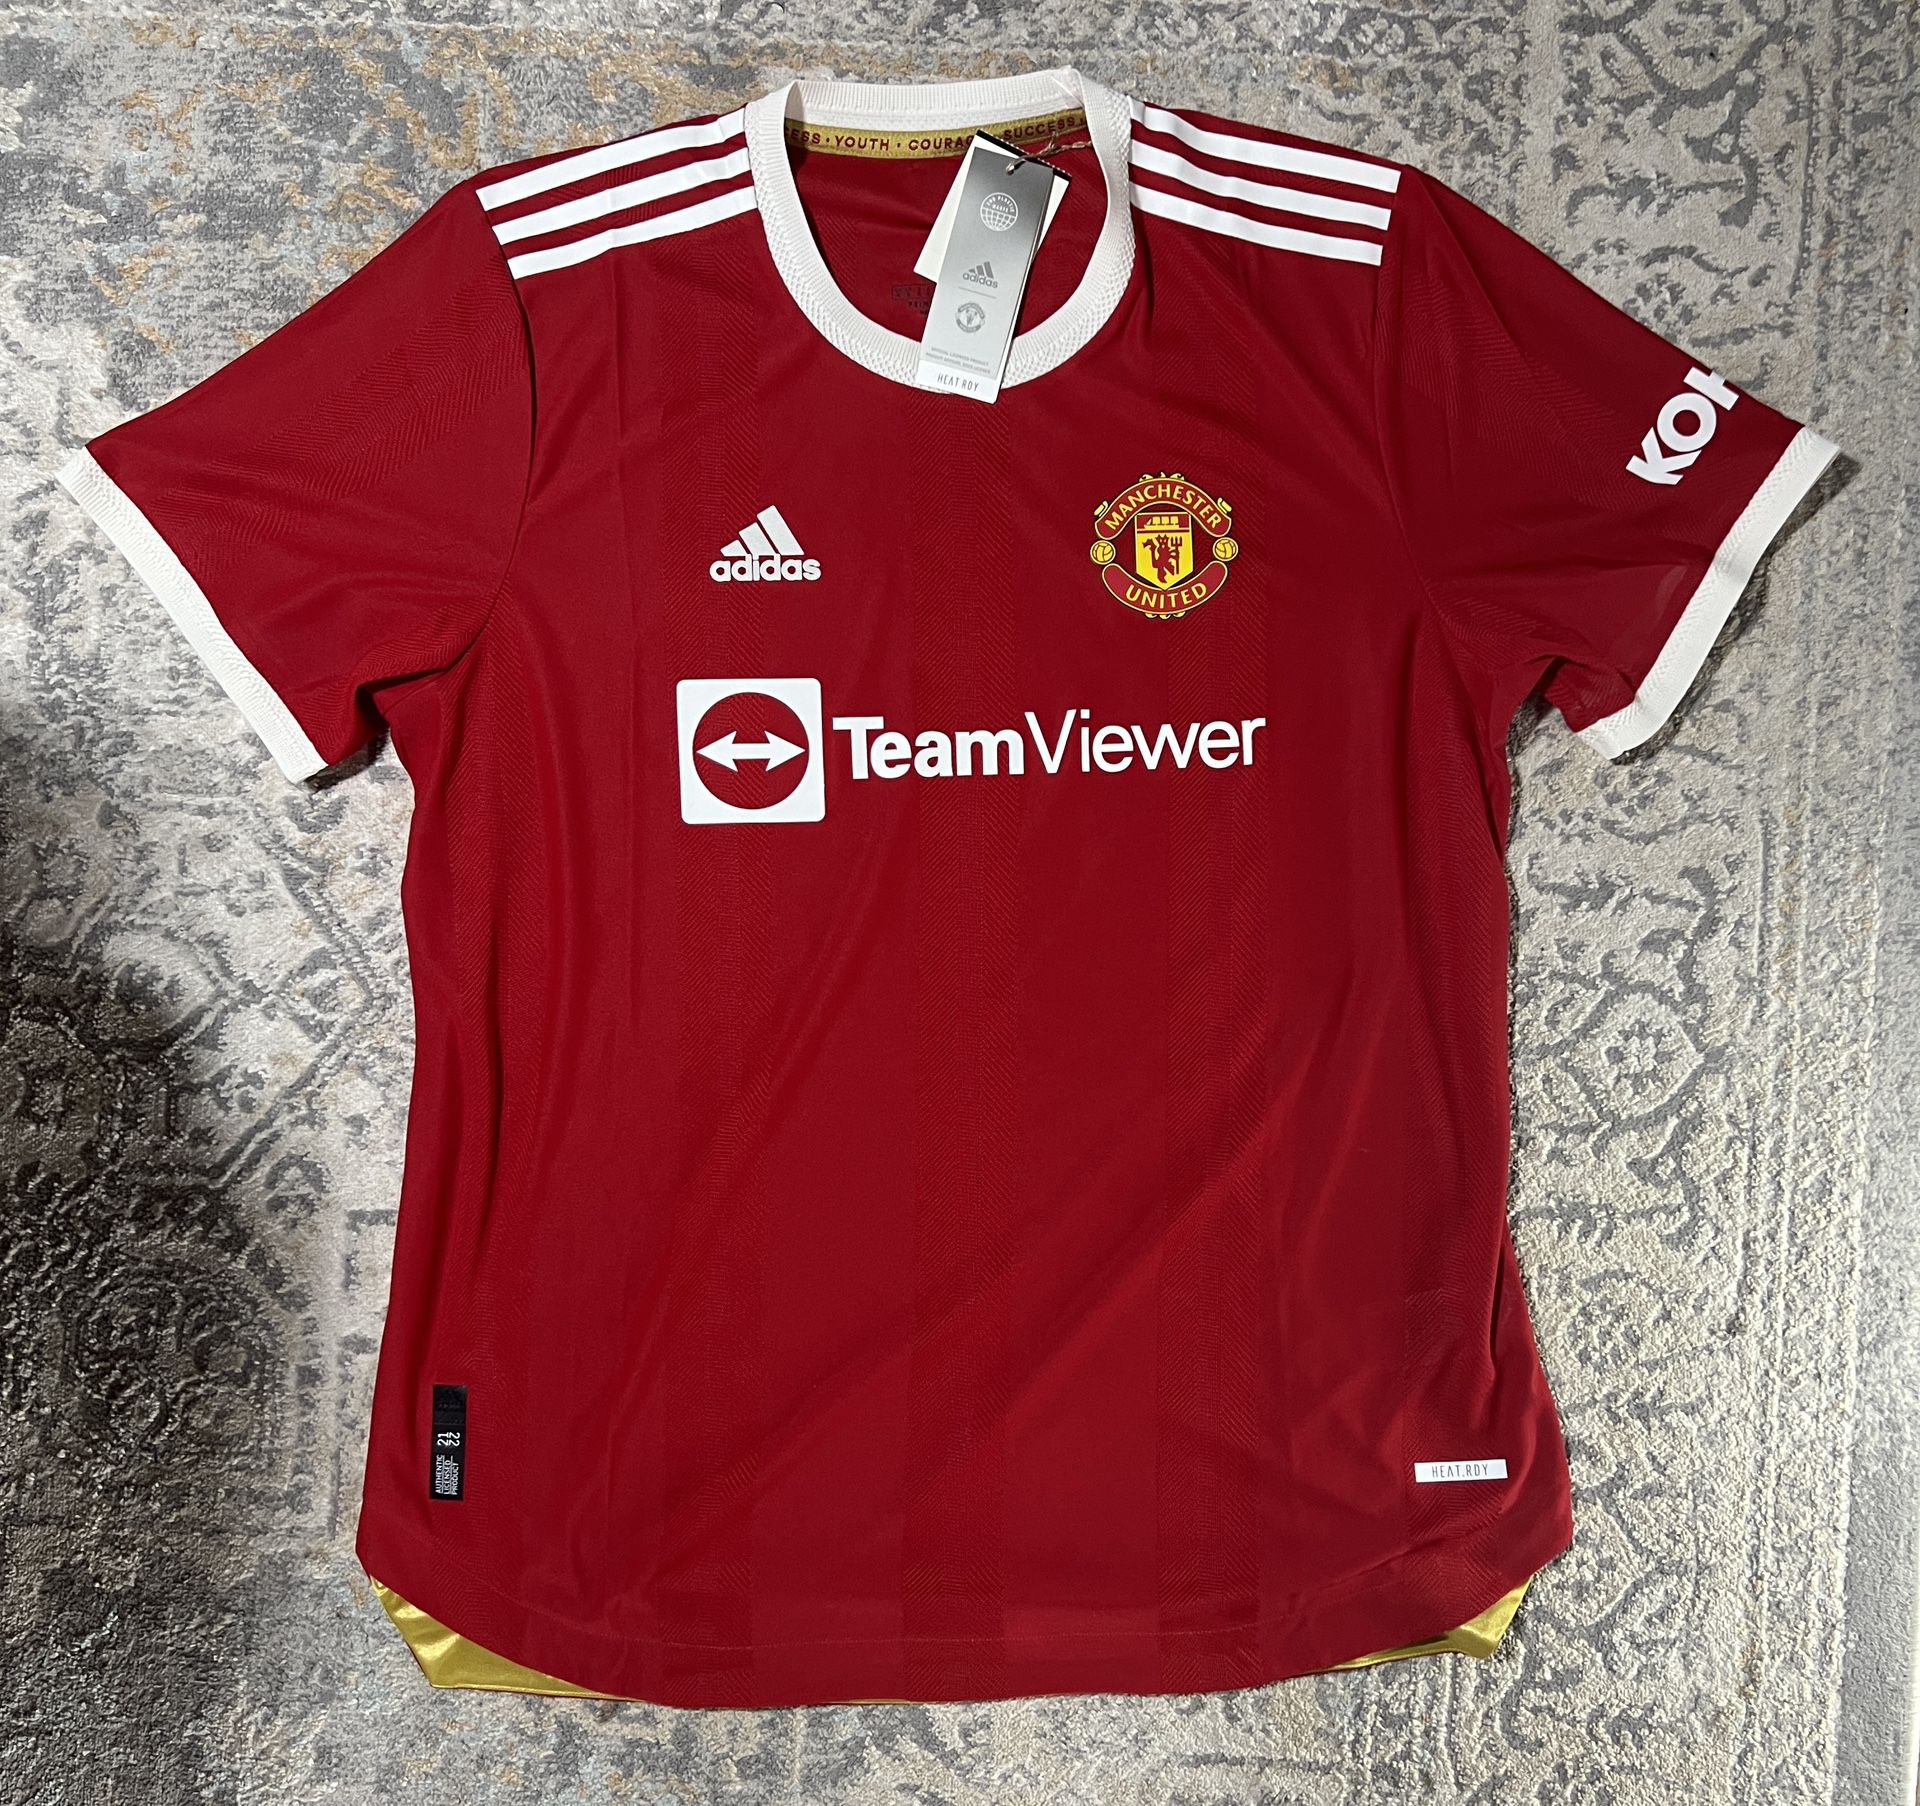 Adidas Manchester United Home Authentic Soccer Jersey 2021/22 Red Size XL $130